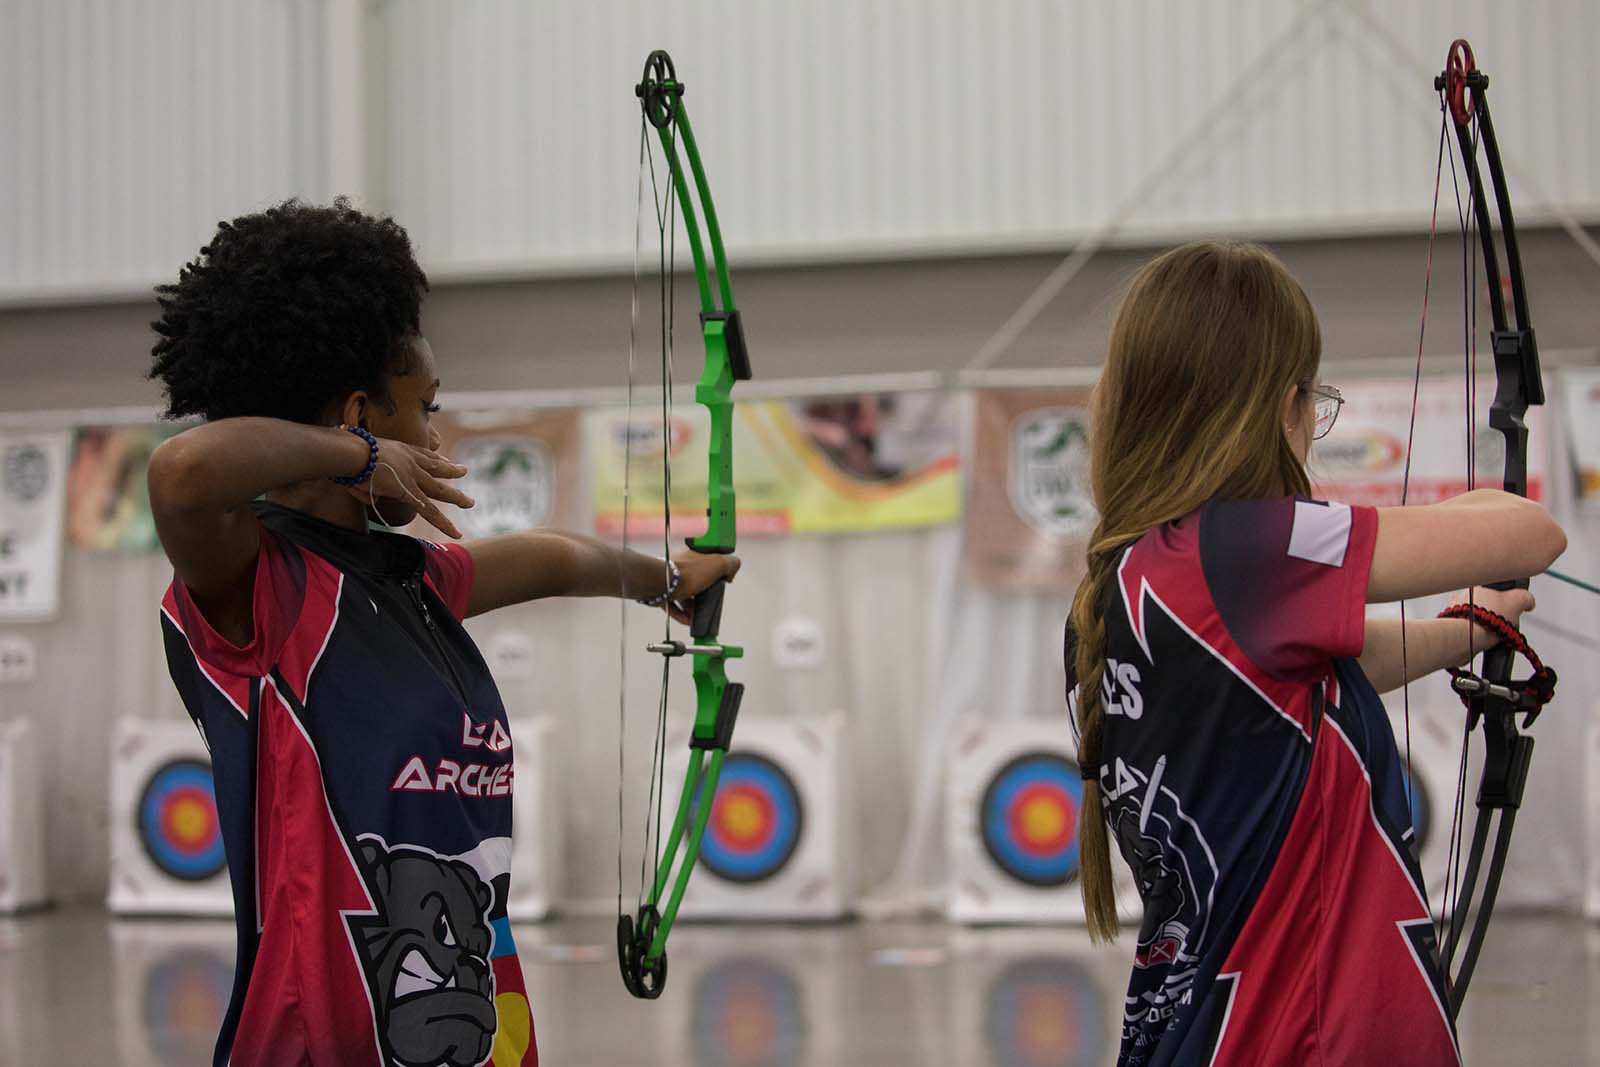 Two young archers shooting arrows at targets during a tournament